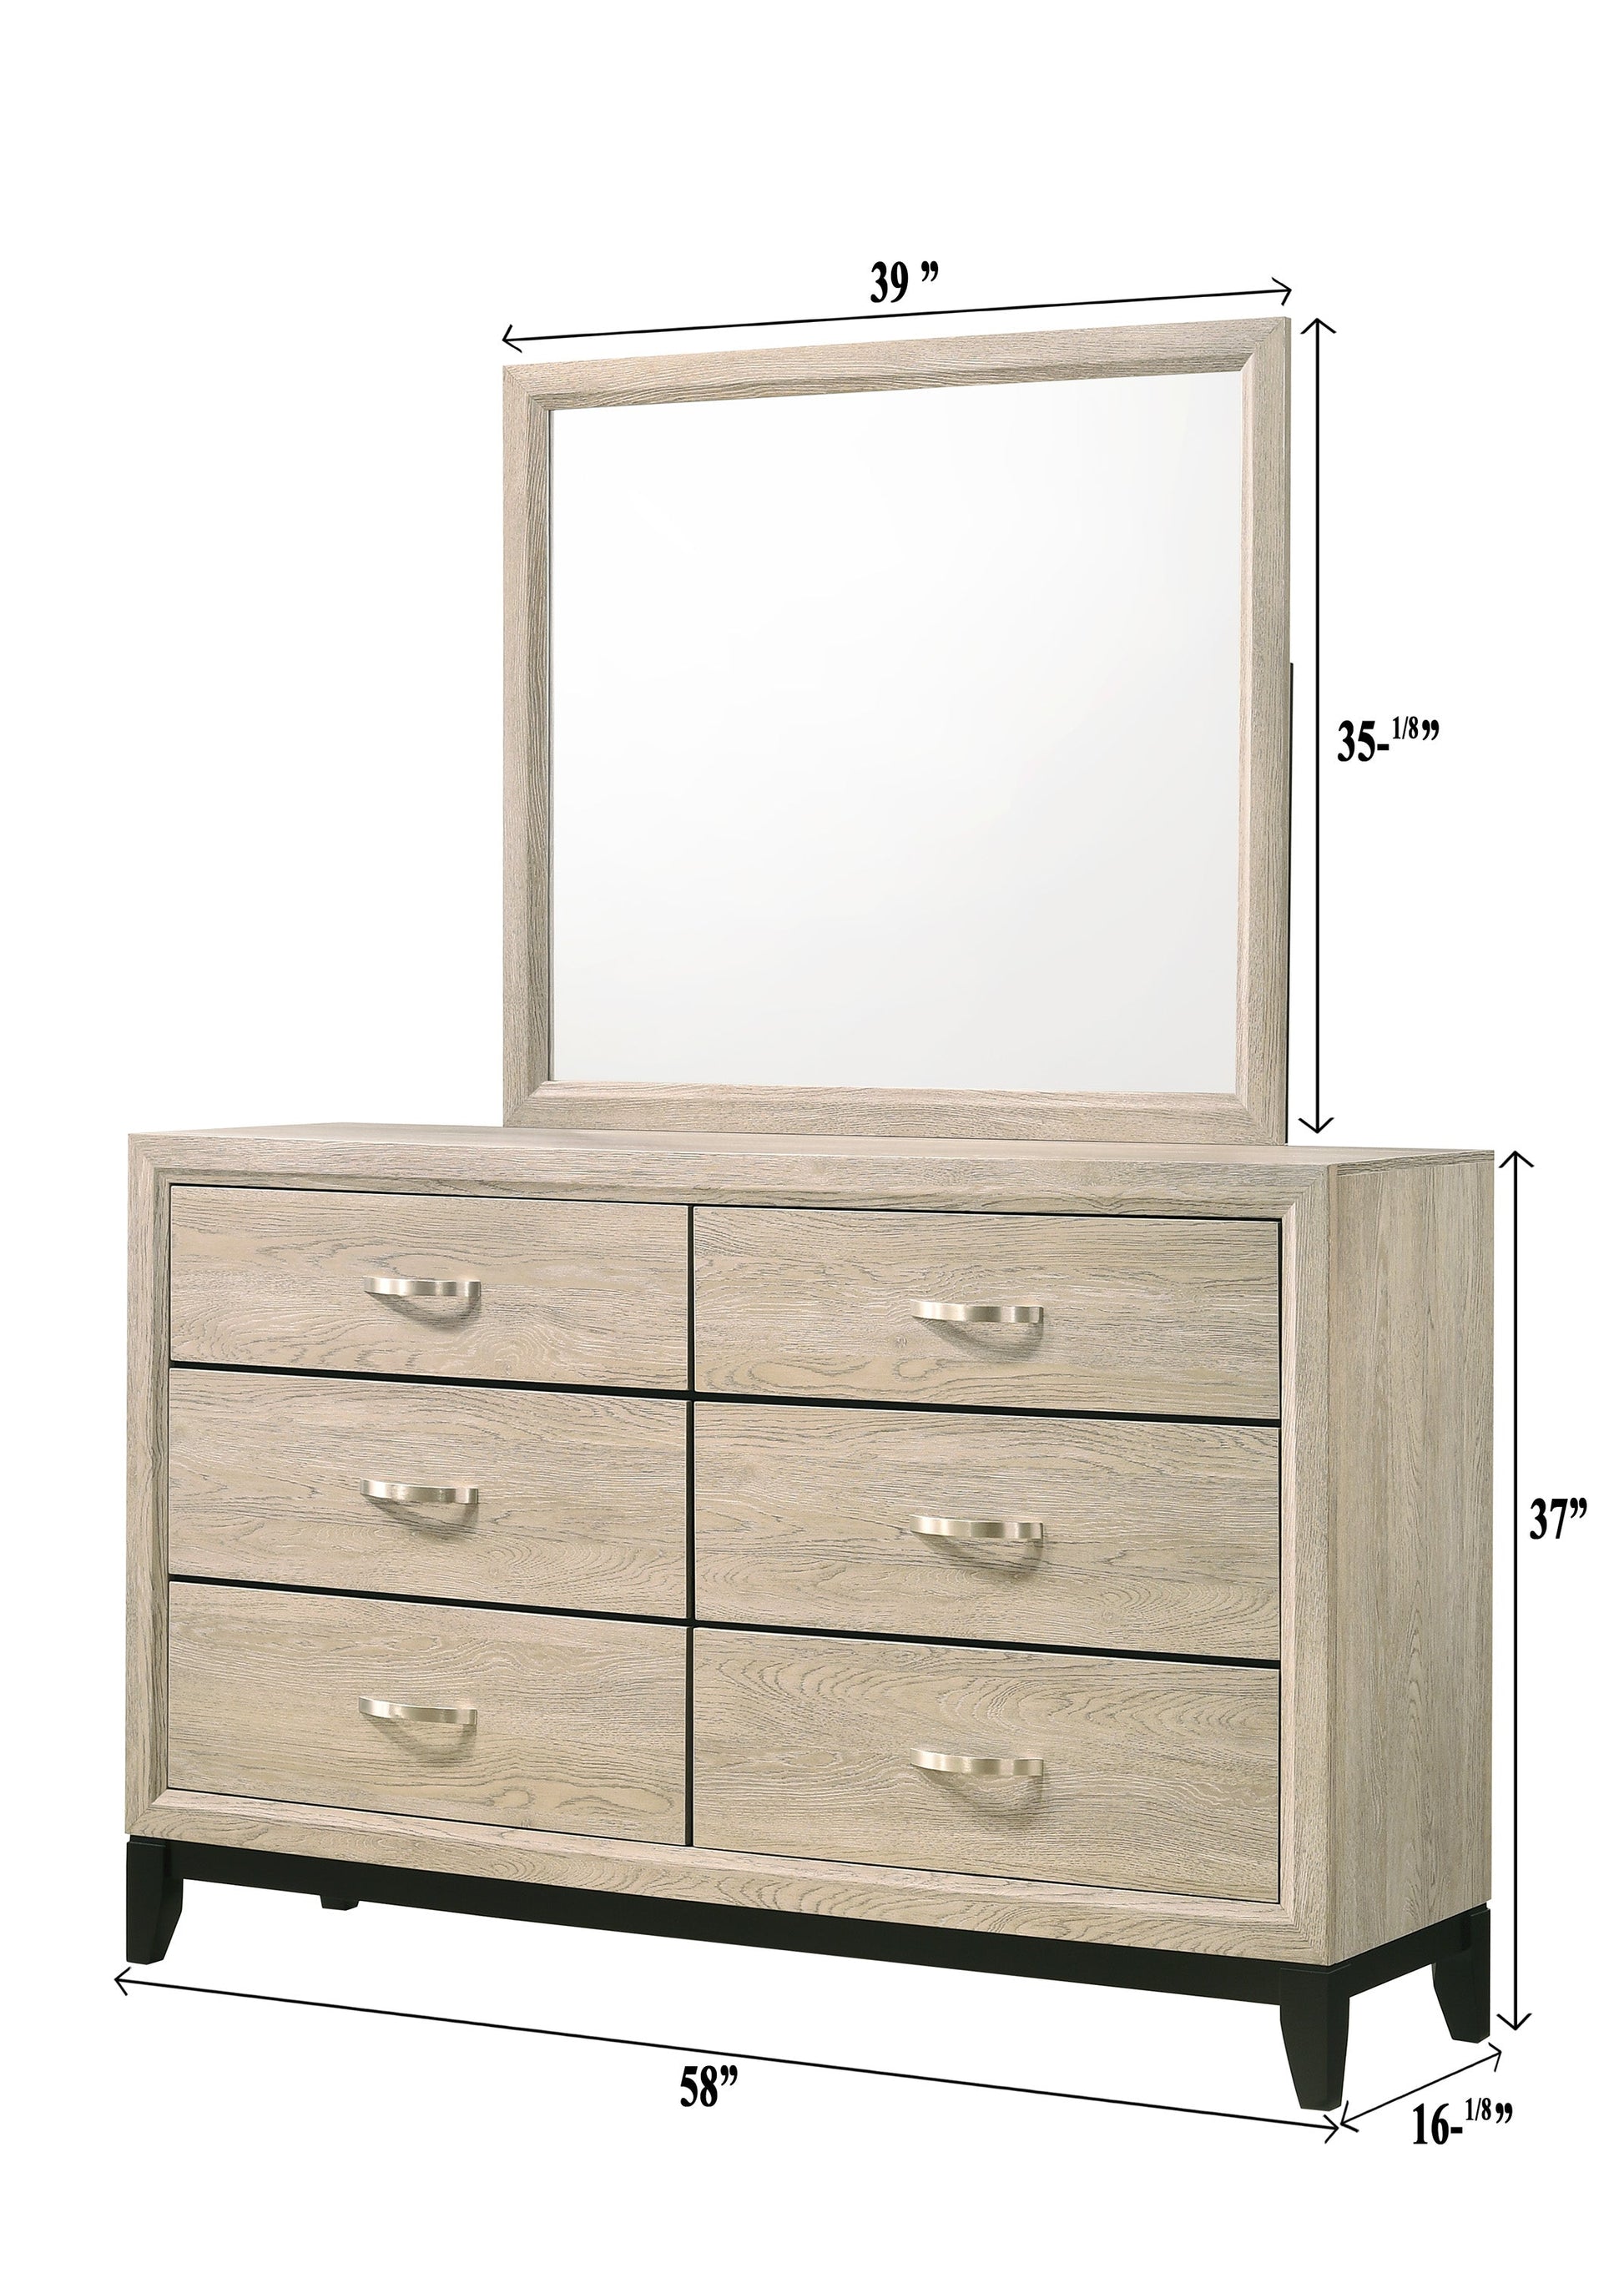 Akerson Driftwood Finish Wood Modern Rustic And Charm Panel Bedroom Set